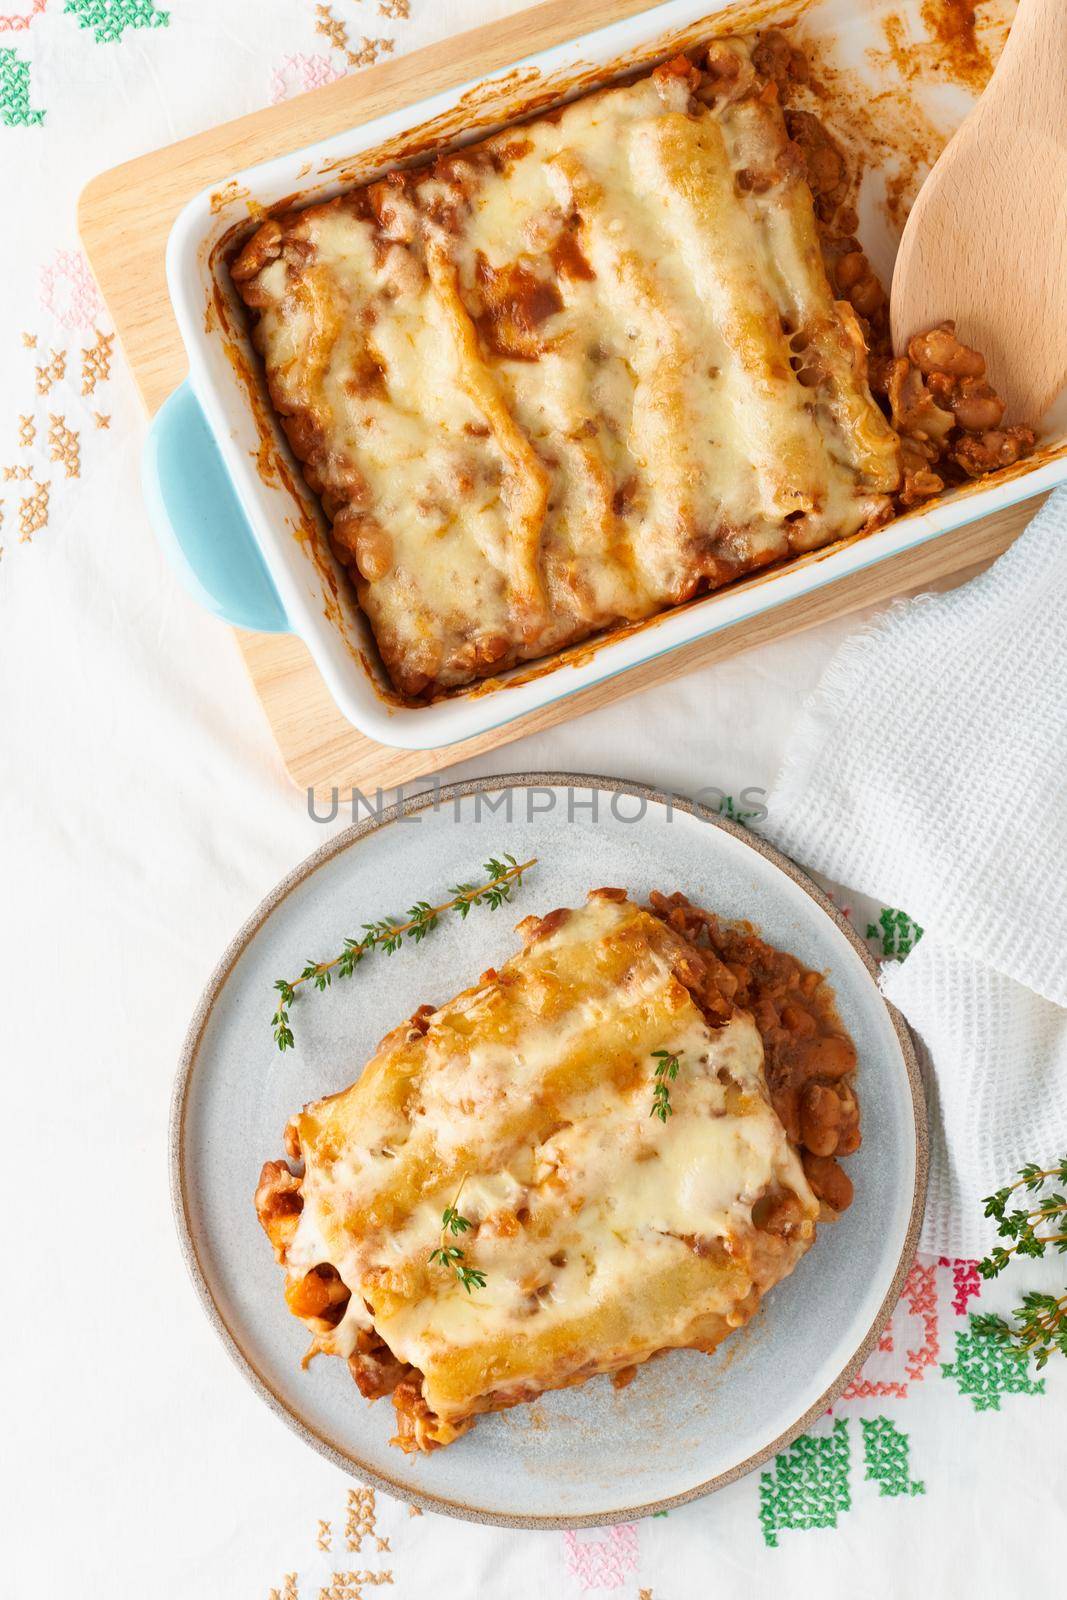 Cannelloni pasta with filling of ground beef, tomatoes, baked with bechamel tomato sauce and a mozzarella. Classical Italian cuisine, white tablecloth with embroidery, rustic style, top view, vertical